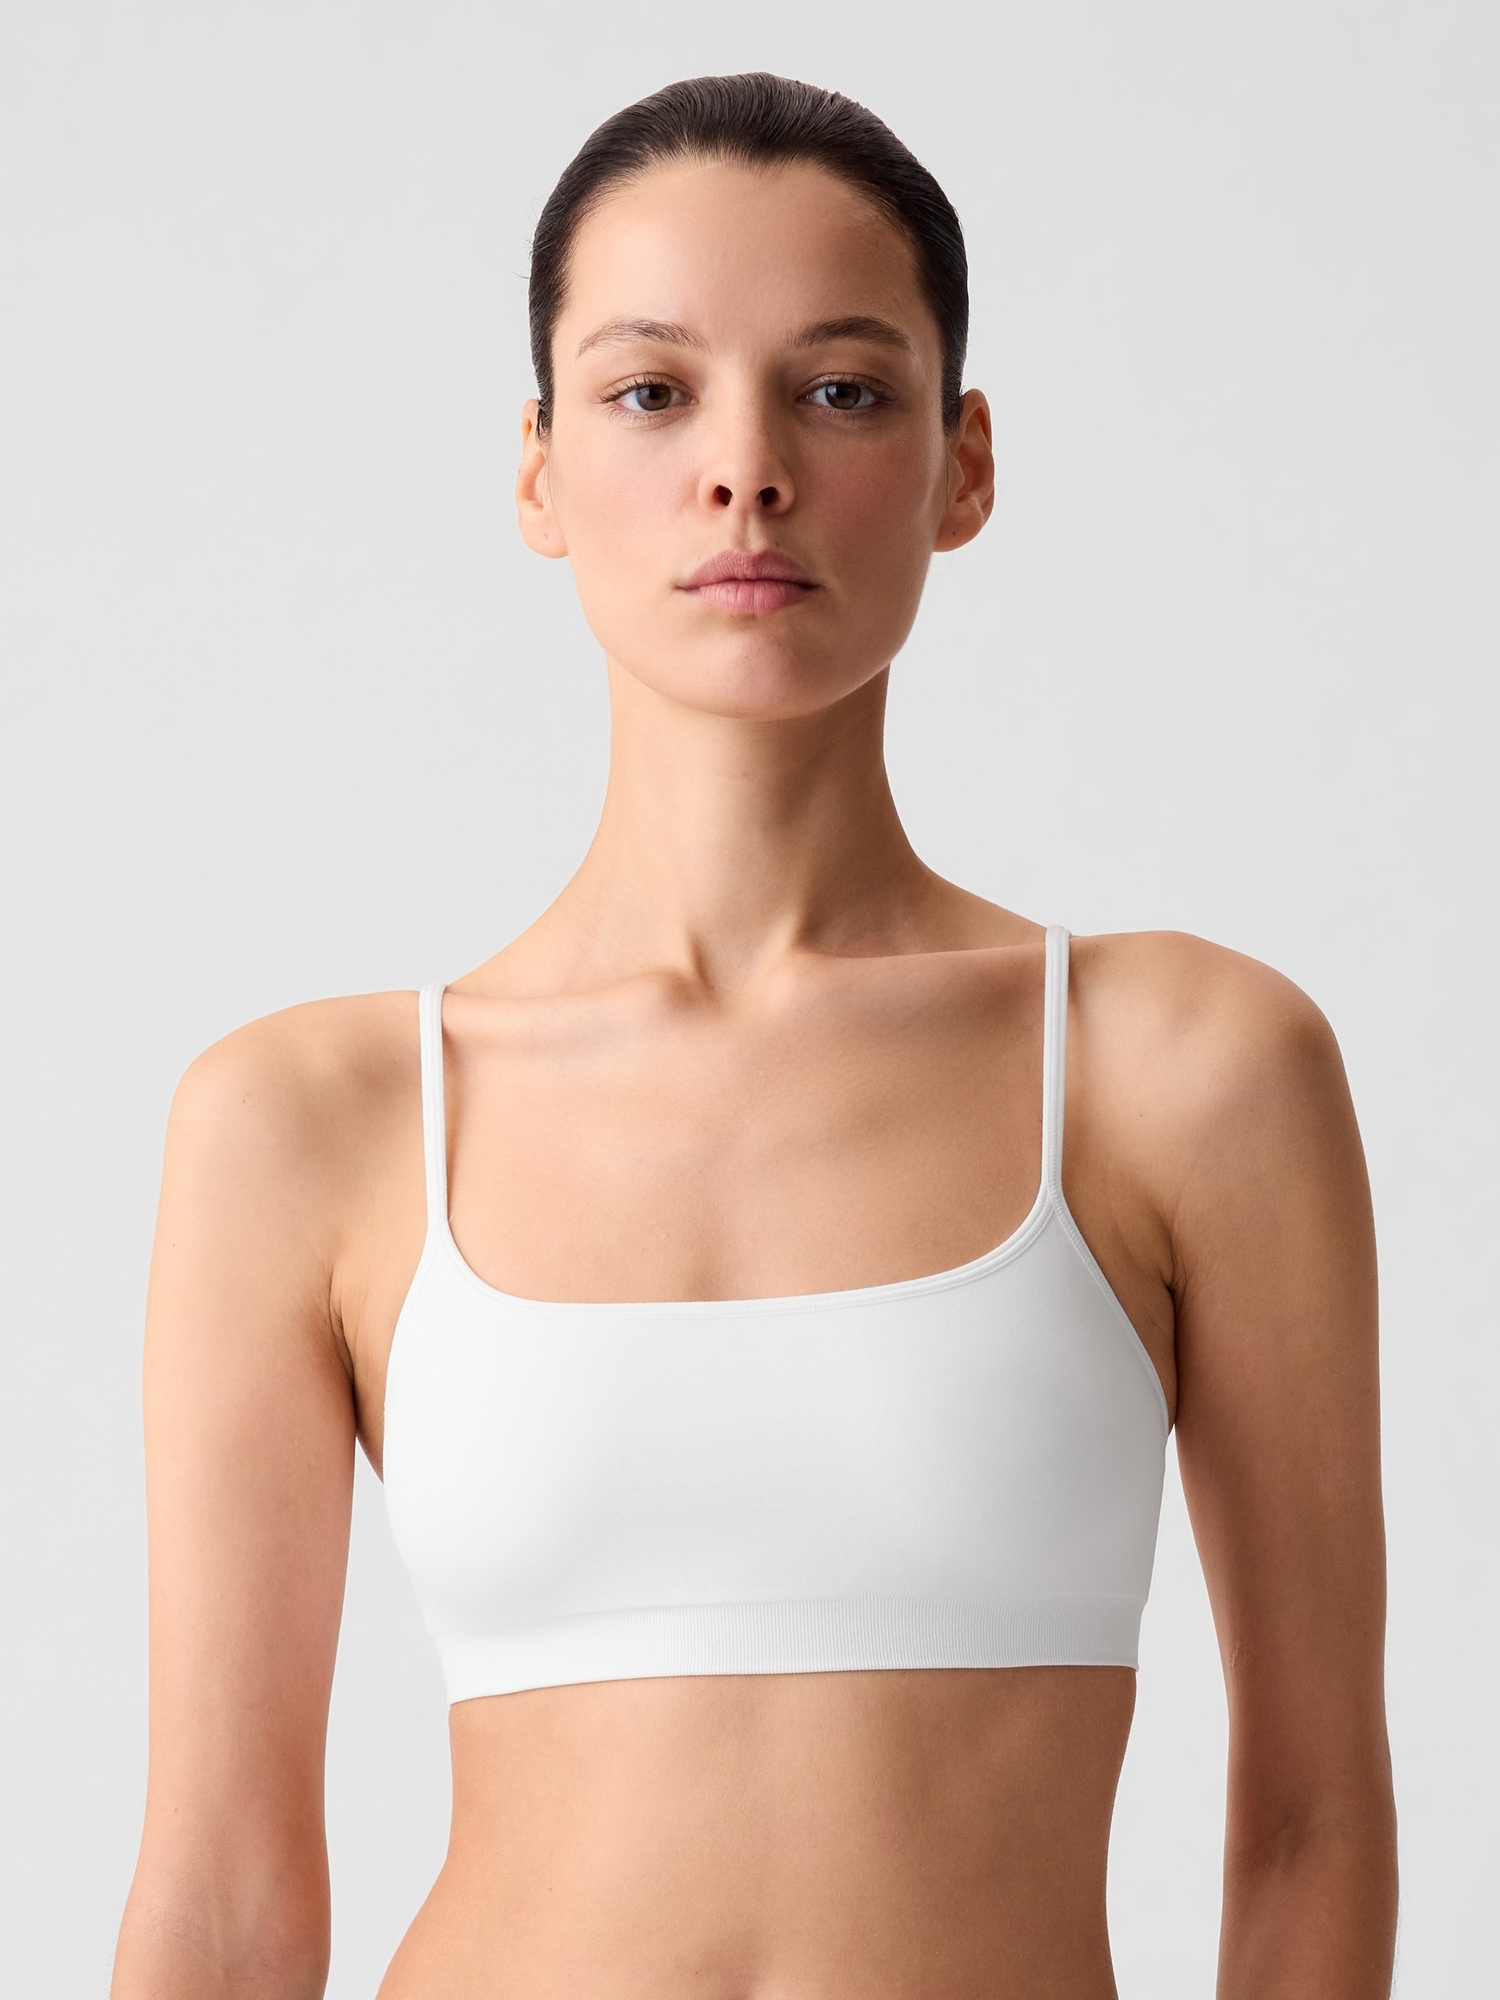 Emprella - Emprella Womens Sports Bra 50% OFF Emprella Sports Bra offer  provides light support with a seam-free construction, knit-in textured  panels, and removable cups for enhanced comfort and shape where you